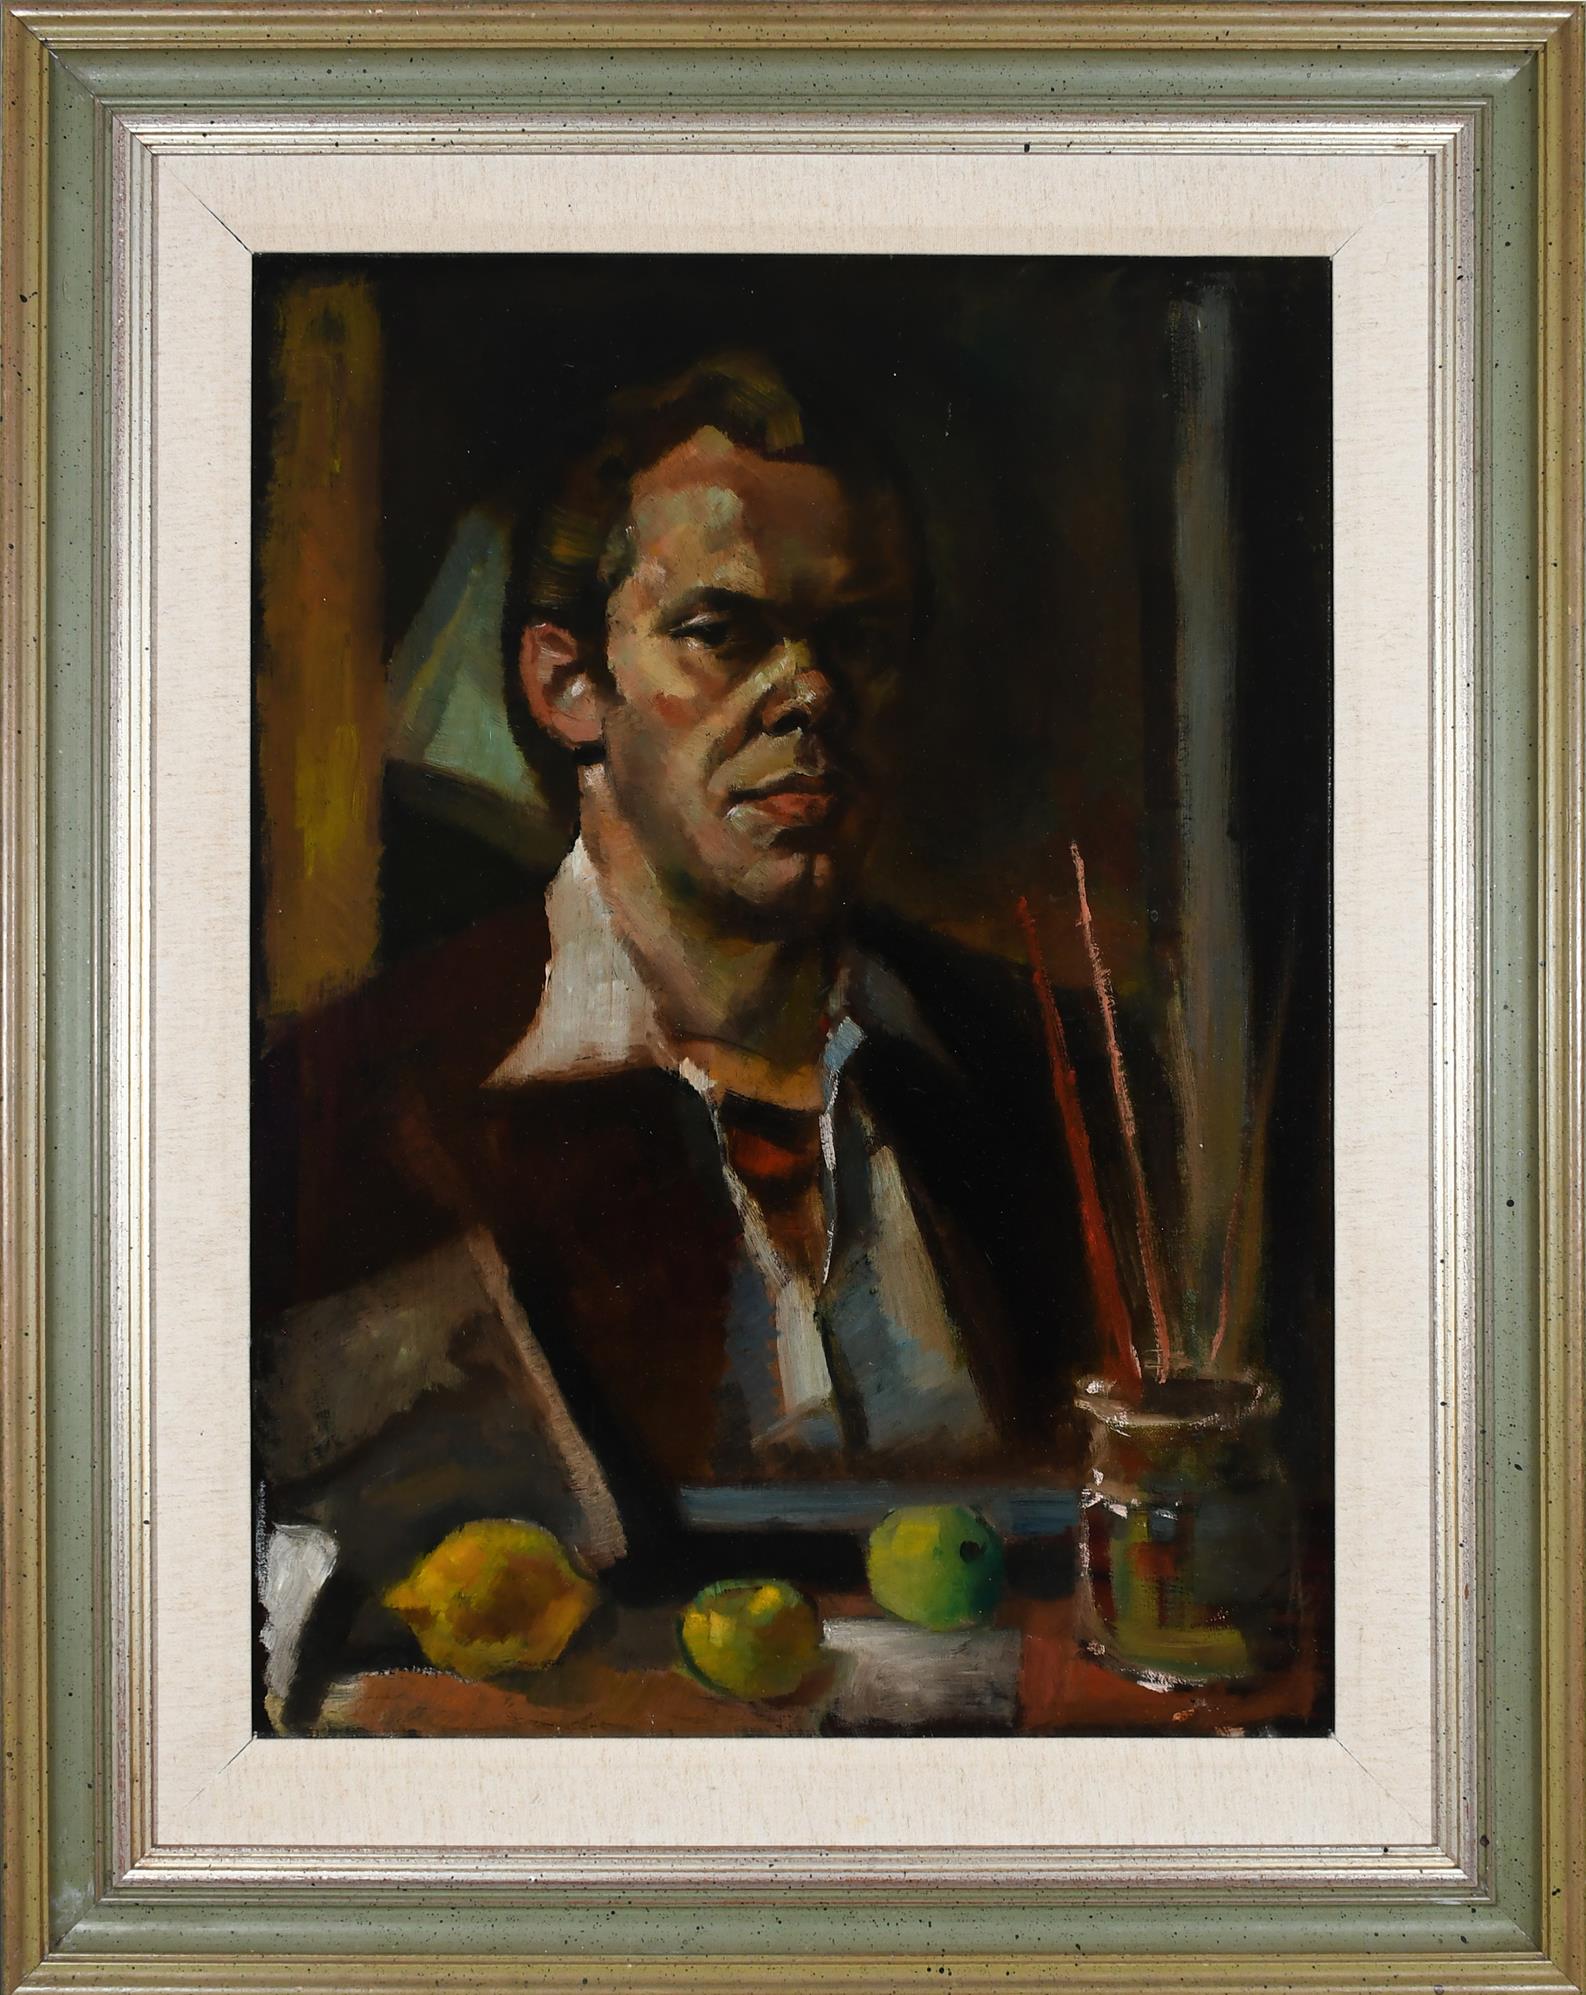 British School 20th Century Self-portrait with paintbrushes and fruit Oil on canvas 68.5 x 51cm - Image 2 of 3